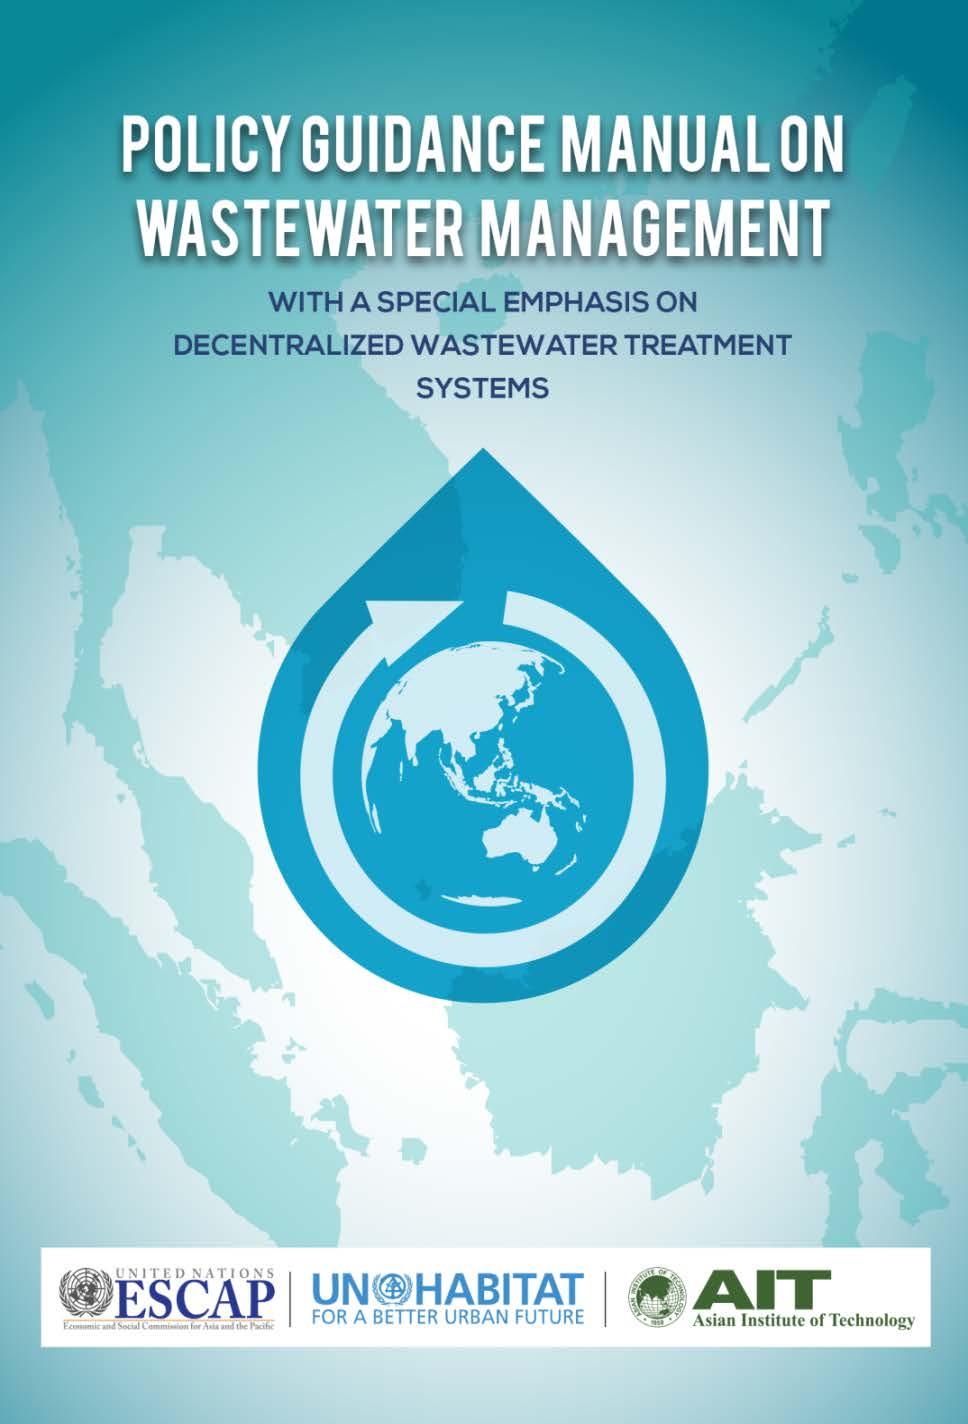 A Toolkit A simplified policy guidance on wastewater